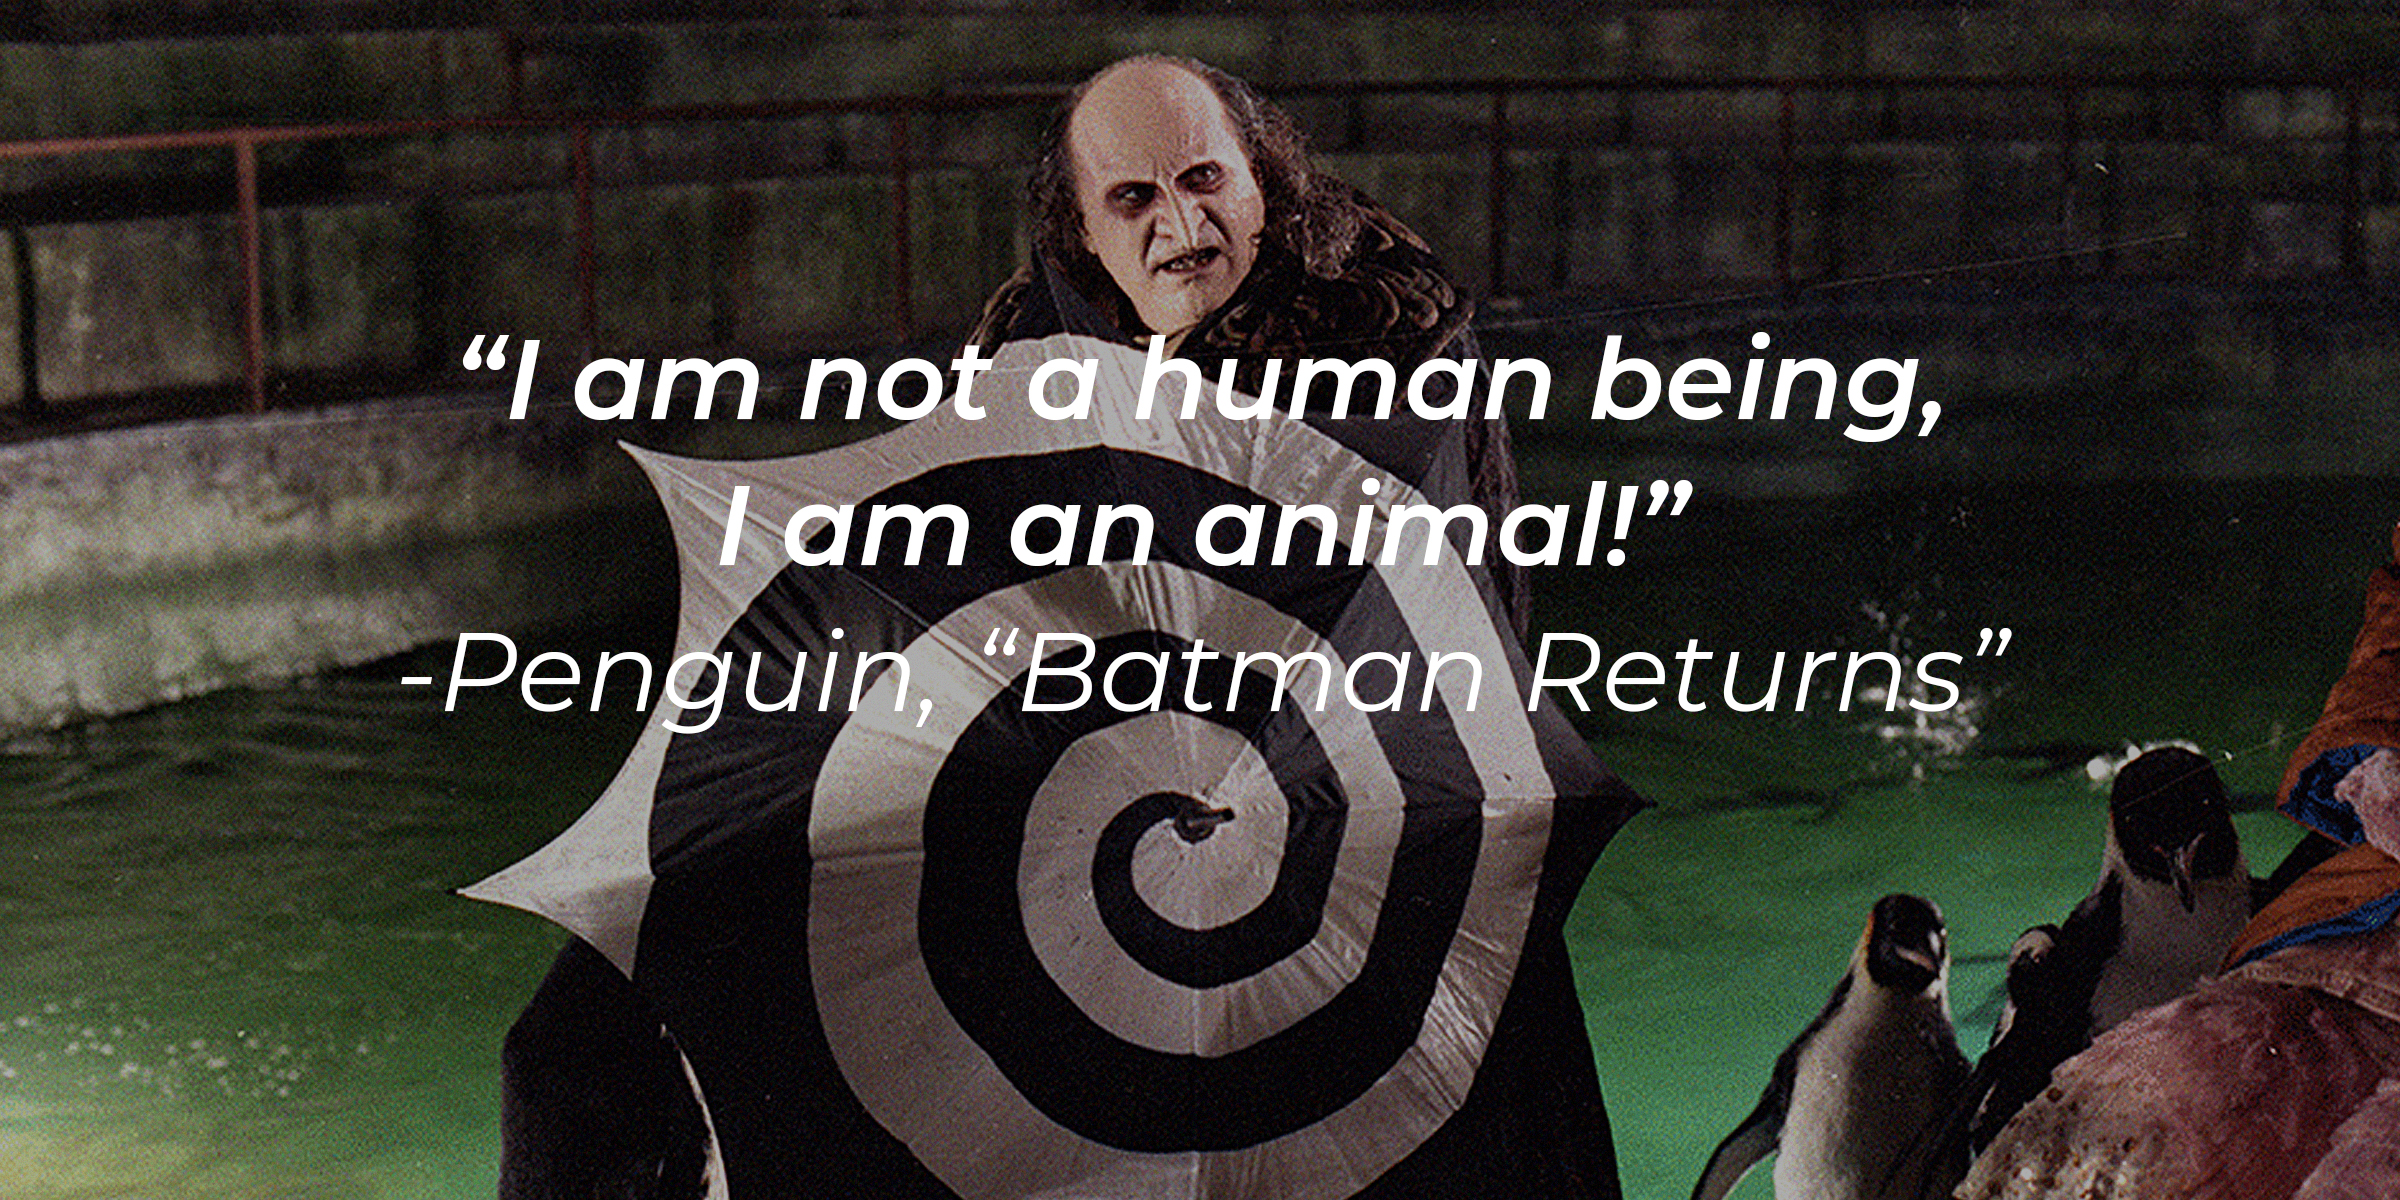 Penguin with his quote: "I am not a human being, I am an anima!" | Source: facebook.com/BatmanReturnsFilm